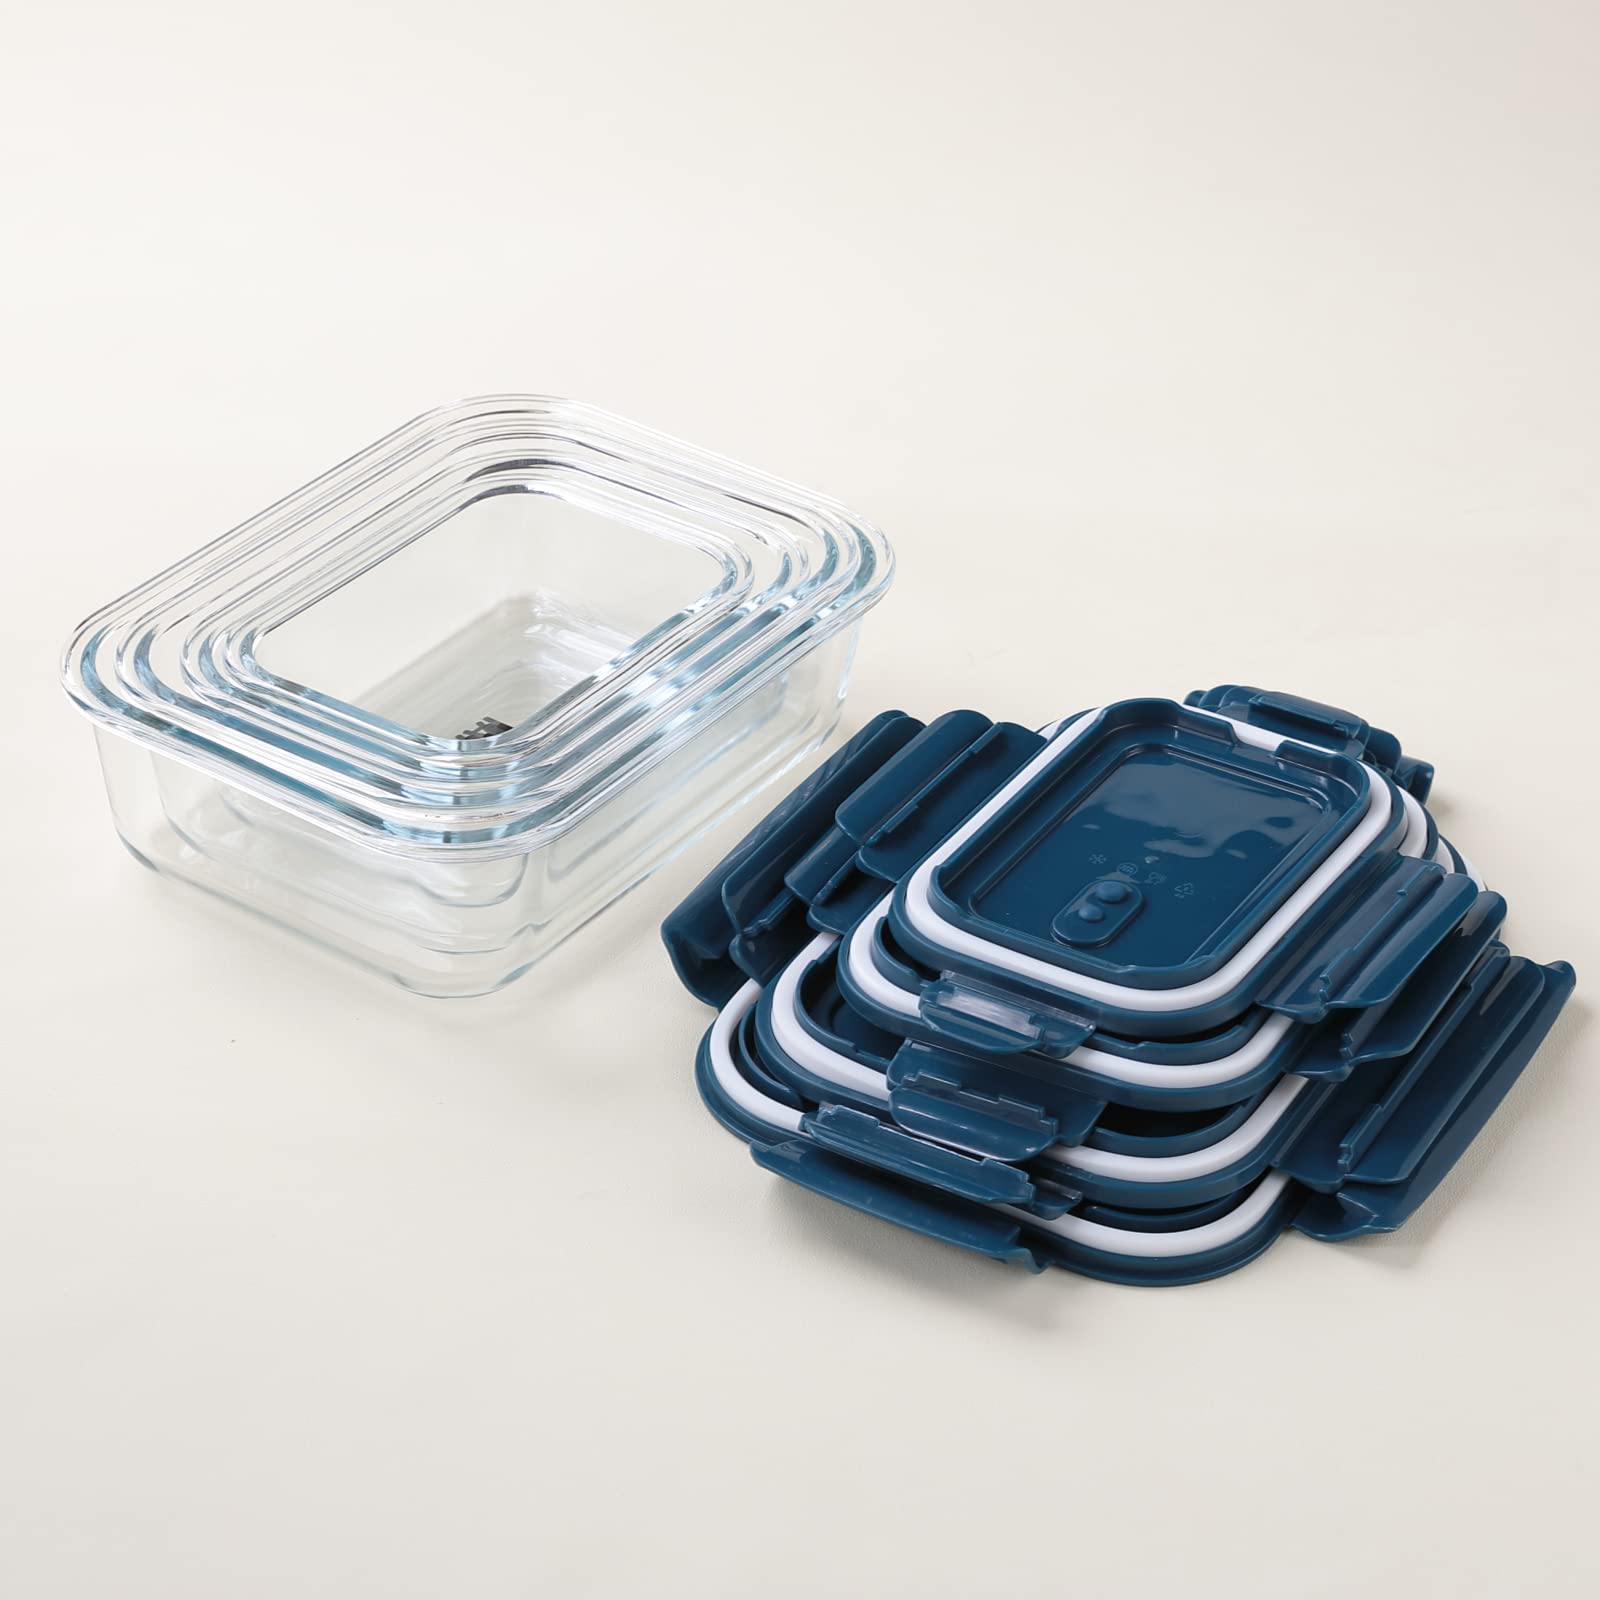 The Better Home Borosilicate Glass Containers with Lid - Glass Lunch Box with Air Vent Lid, Kitchen Containers Set - Microwave & Freezer Safe, Leak Proof, Stackable Design, Set of 4 (Rectangular)